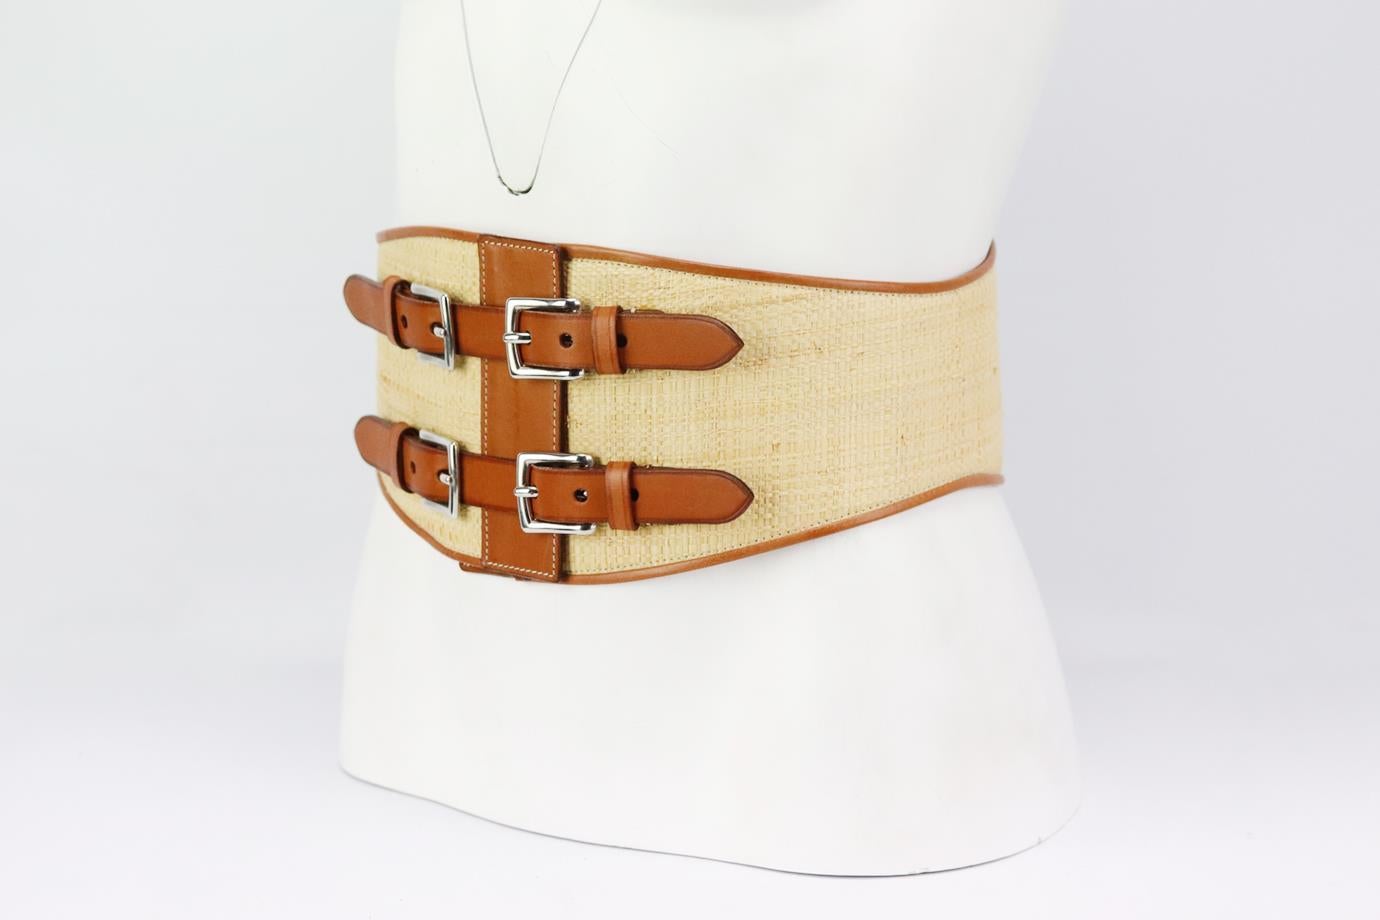 Ralph Lauren raffia and leather waist belt. Made from tan leather with beige raffia with buckle detail at the front. Tan and beige. Buckle fastening at front. Min Length: 28 in. Max Length: 30 in. Width: 5 in